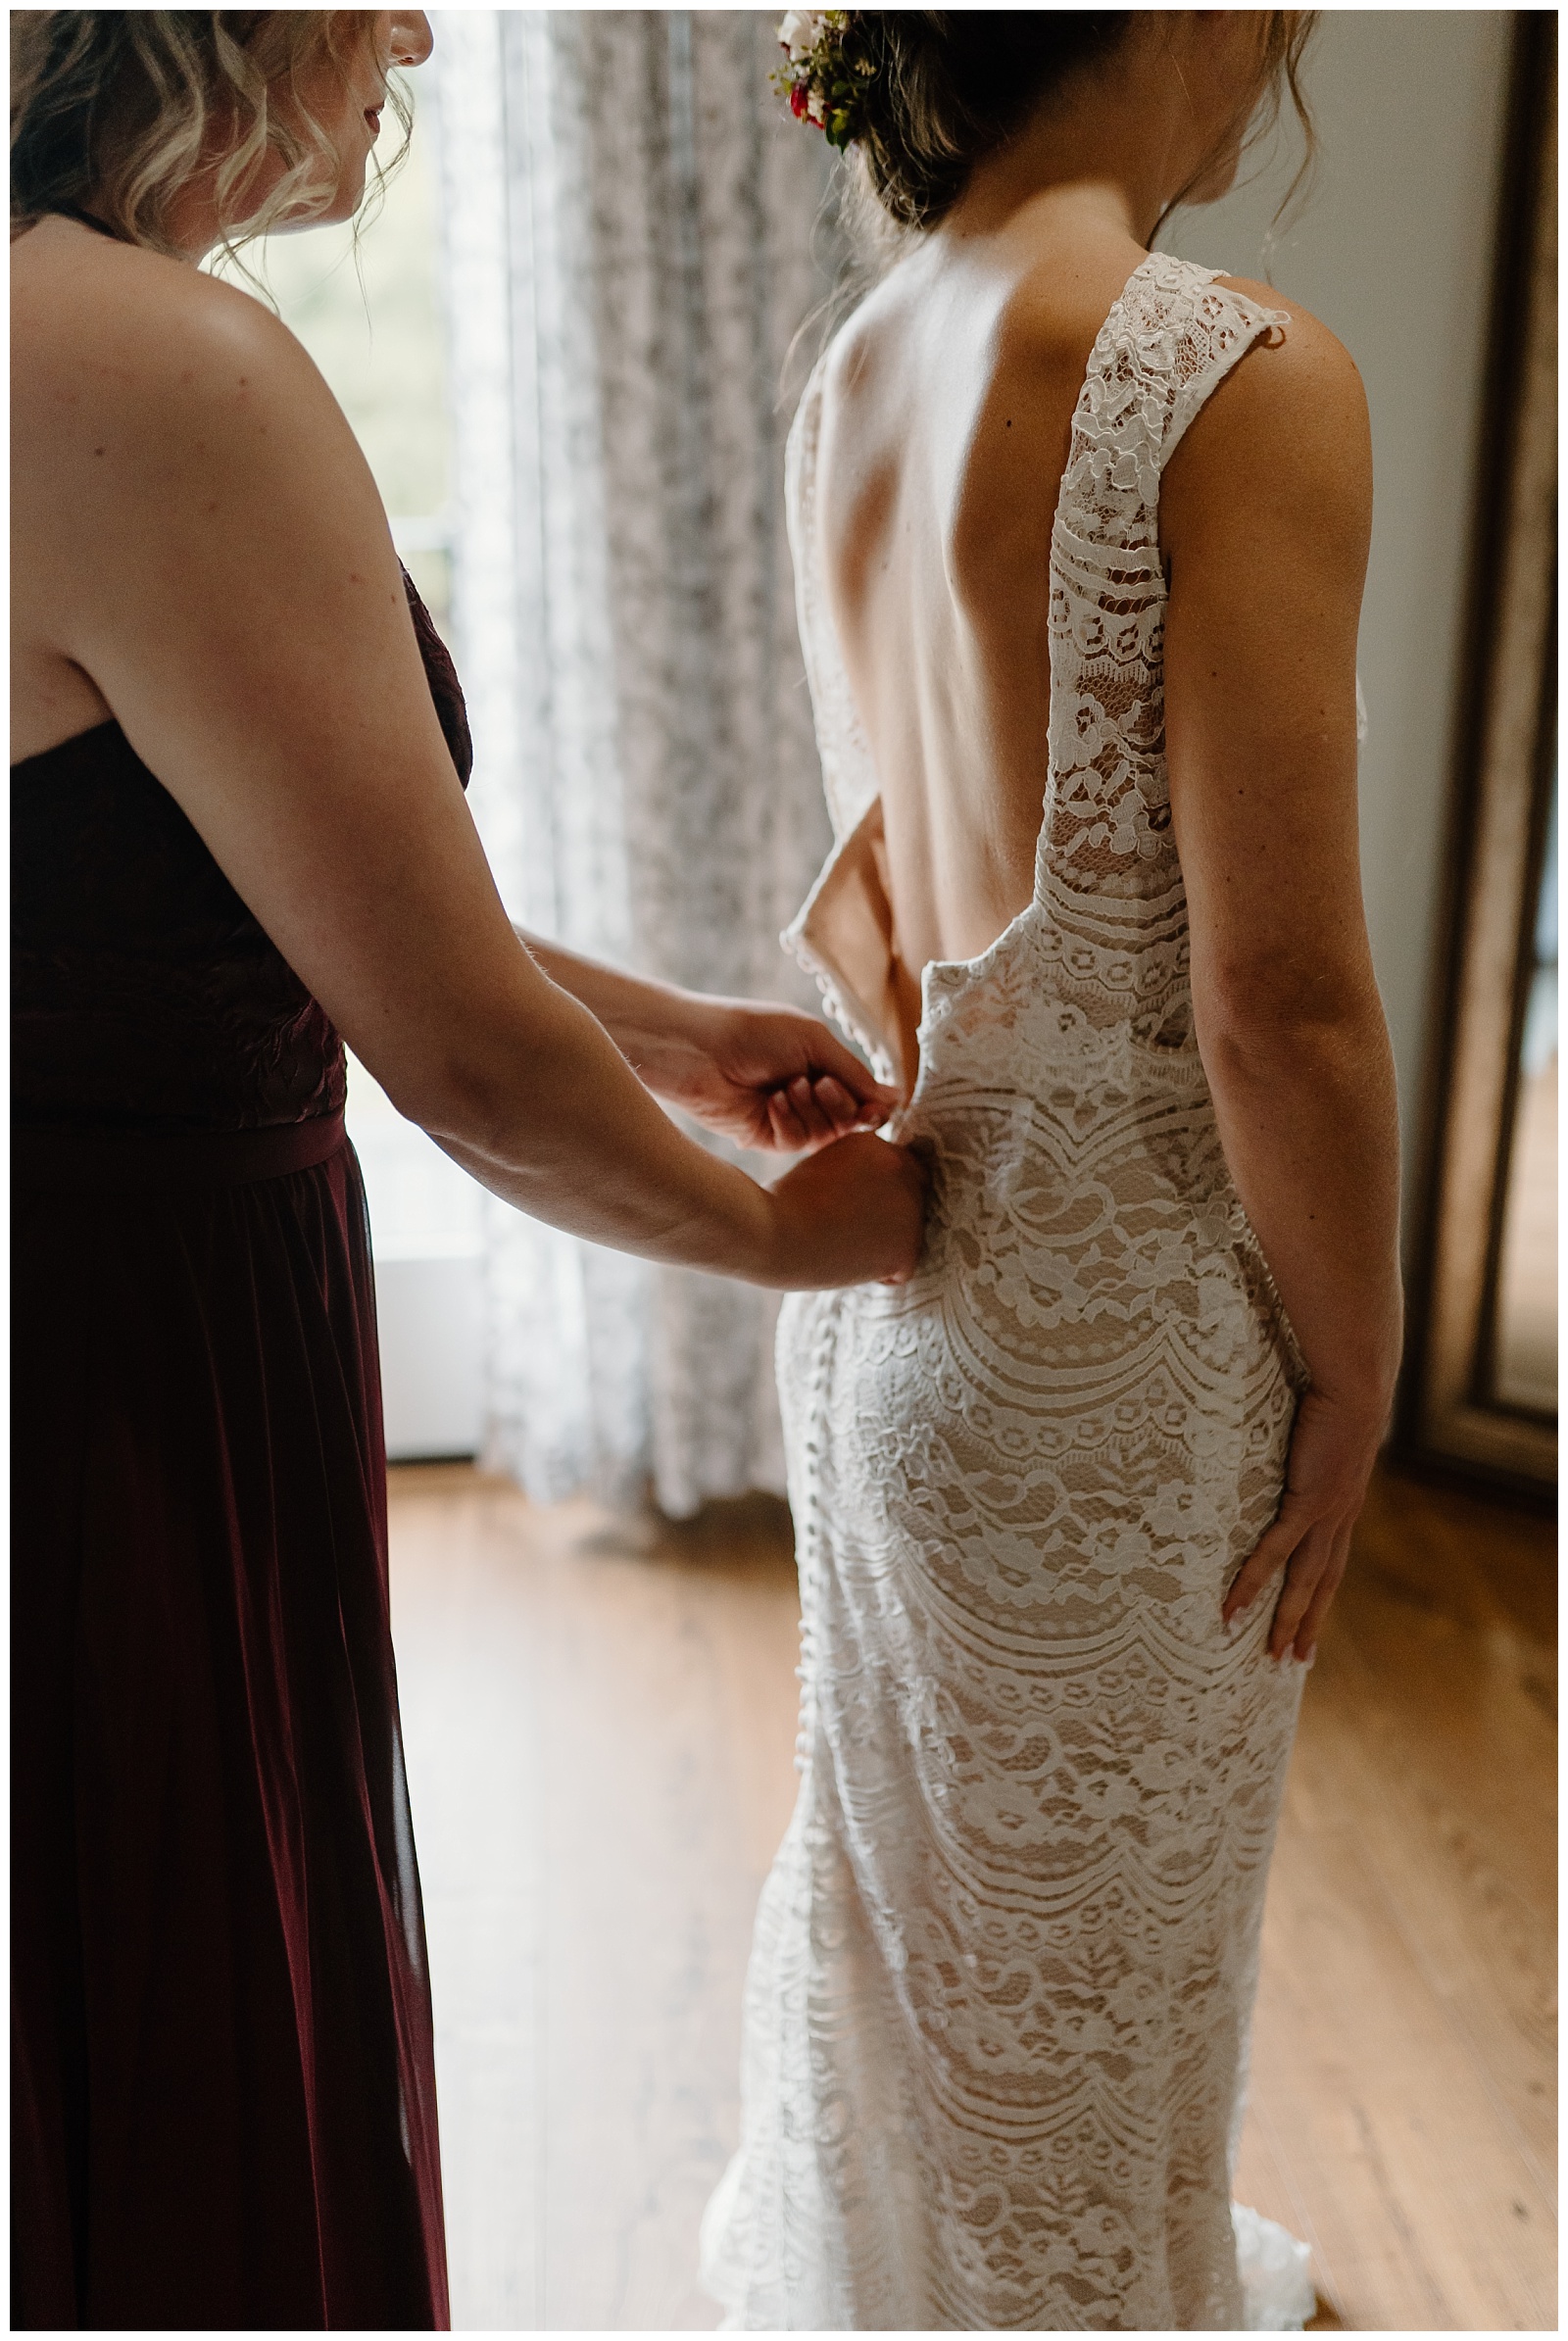 A bridesmaid helps zip up the back of a lacey fitted bridal gown.